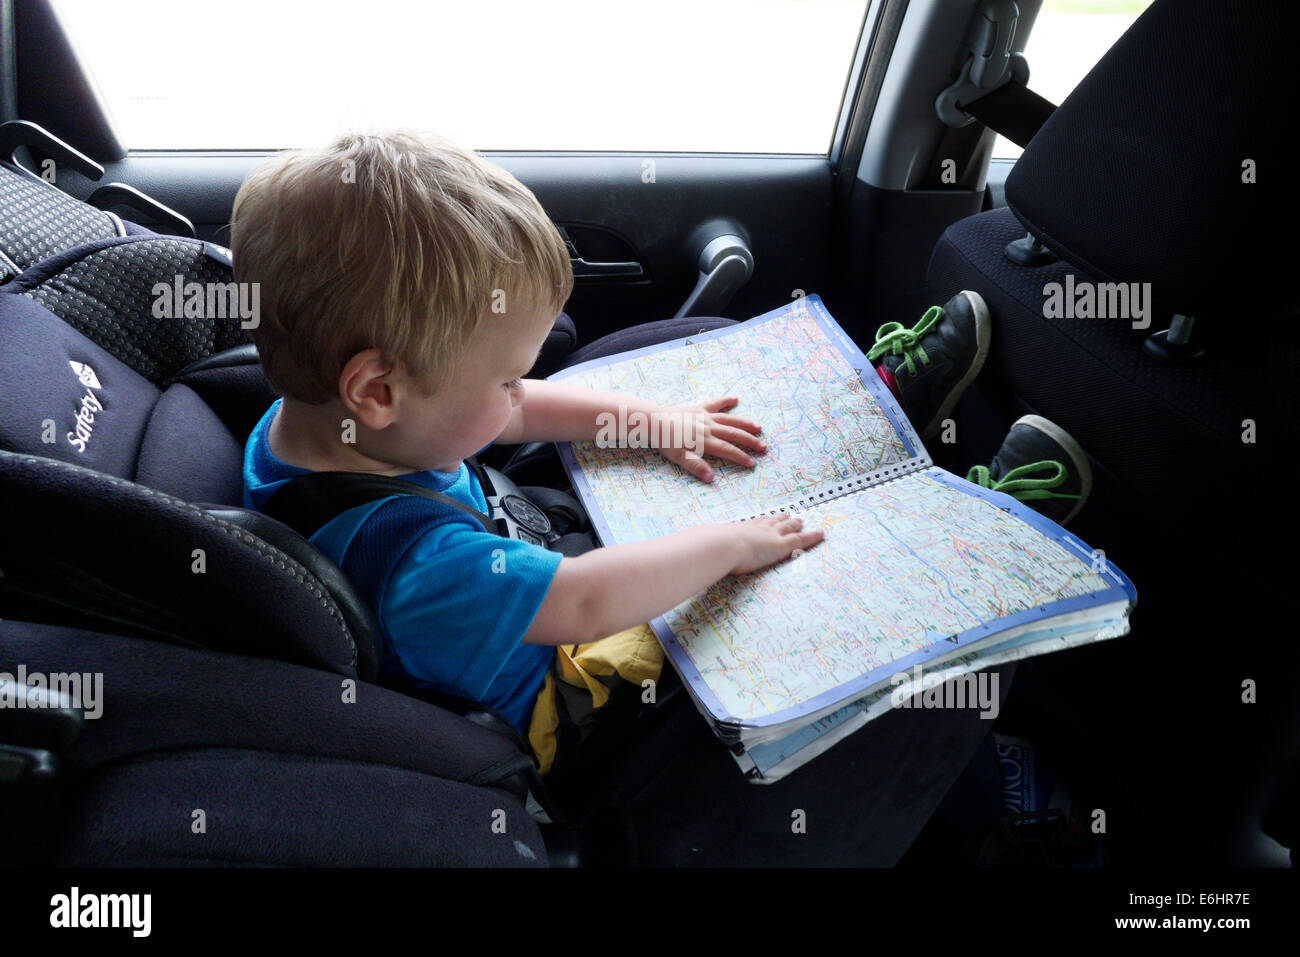 A young boy reading a map in a car seat Stock Photo